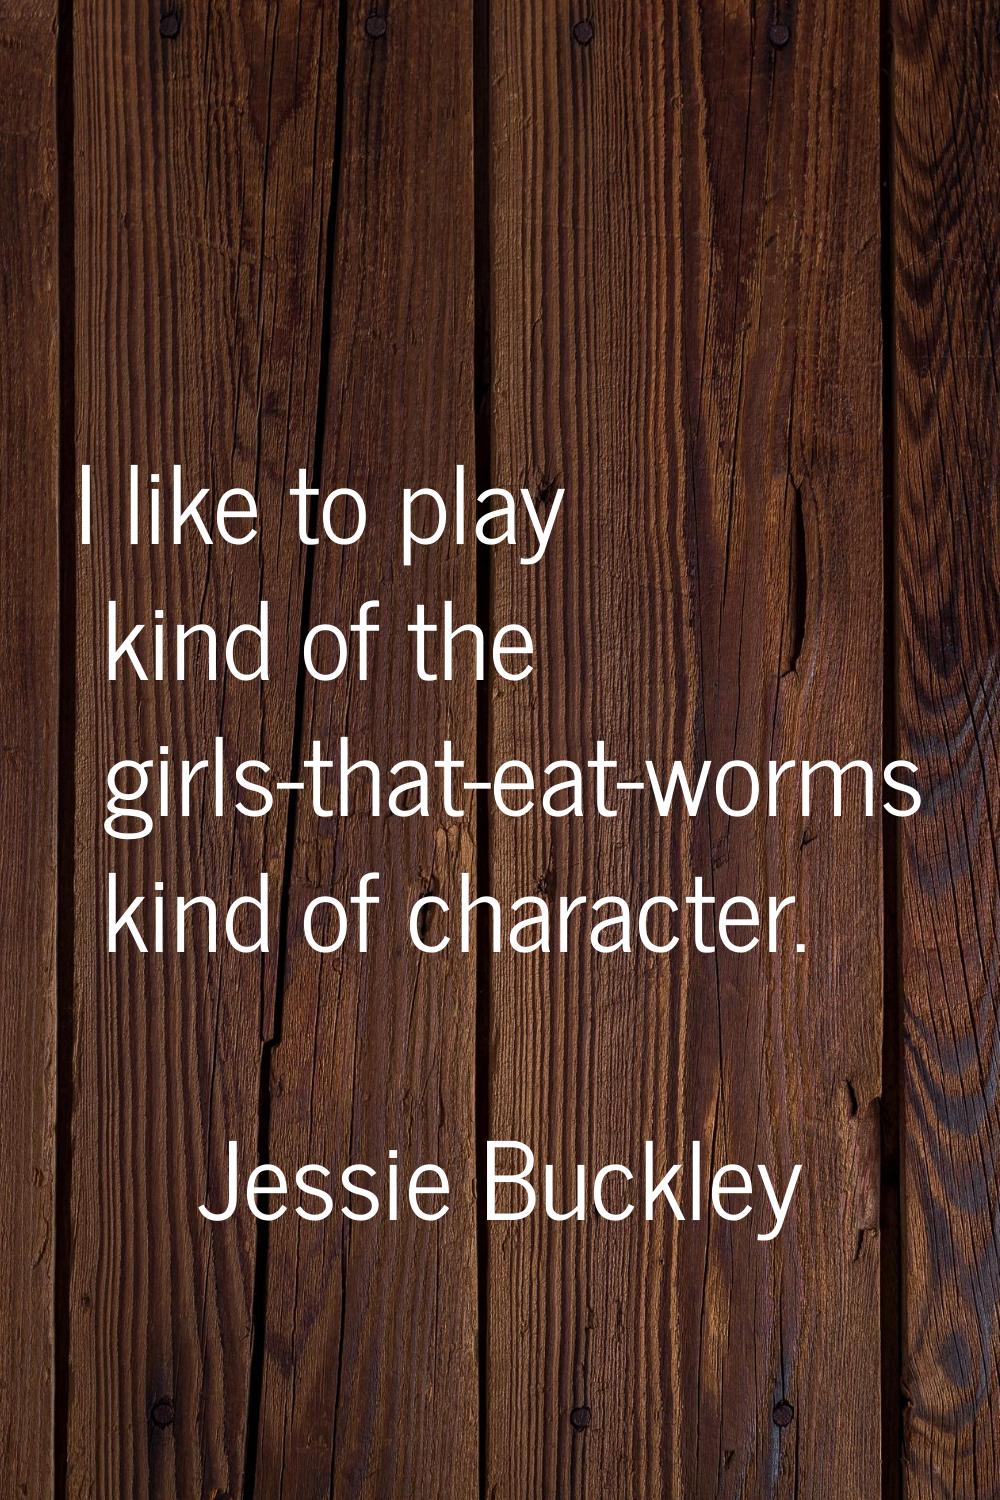 I like to play kind of the girls-that-eat-worms kind of character.